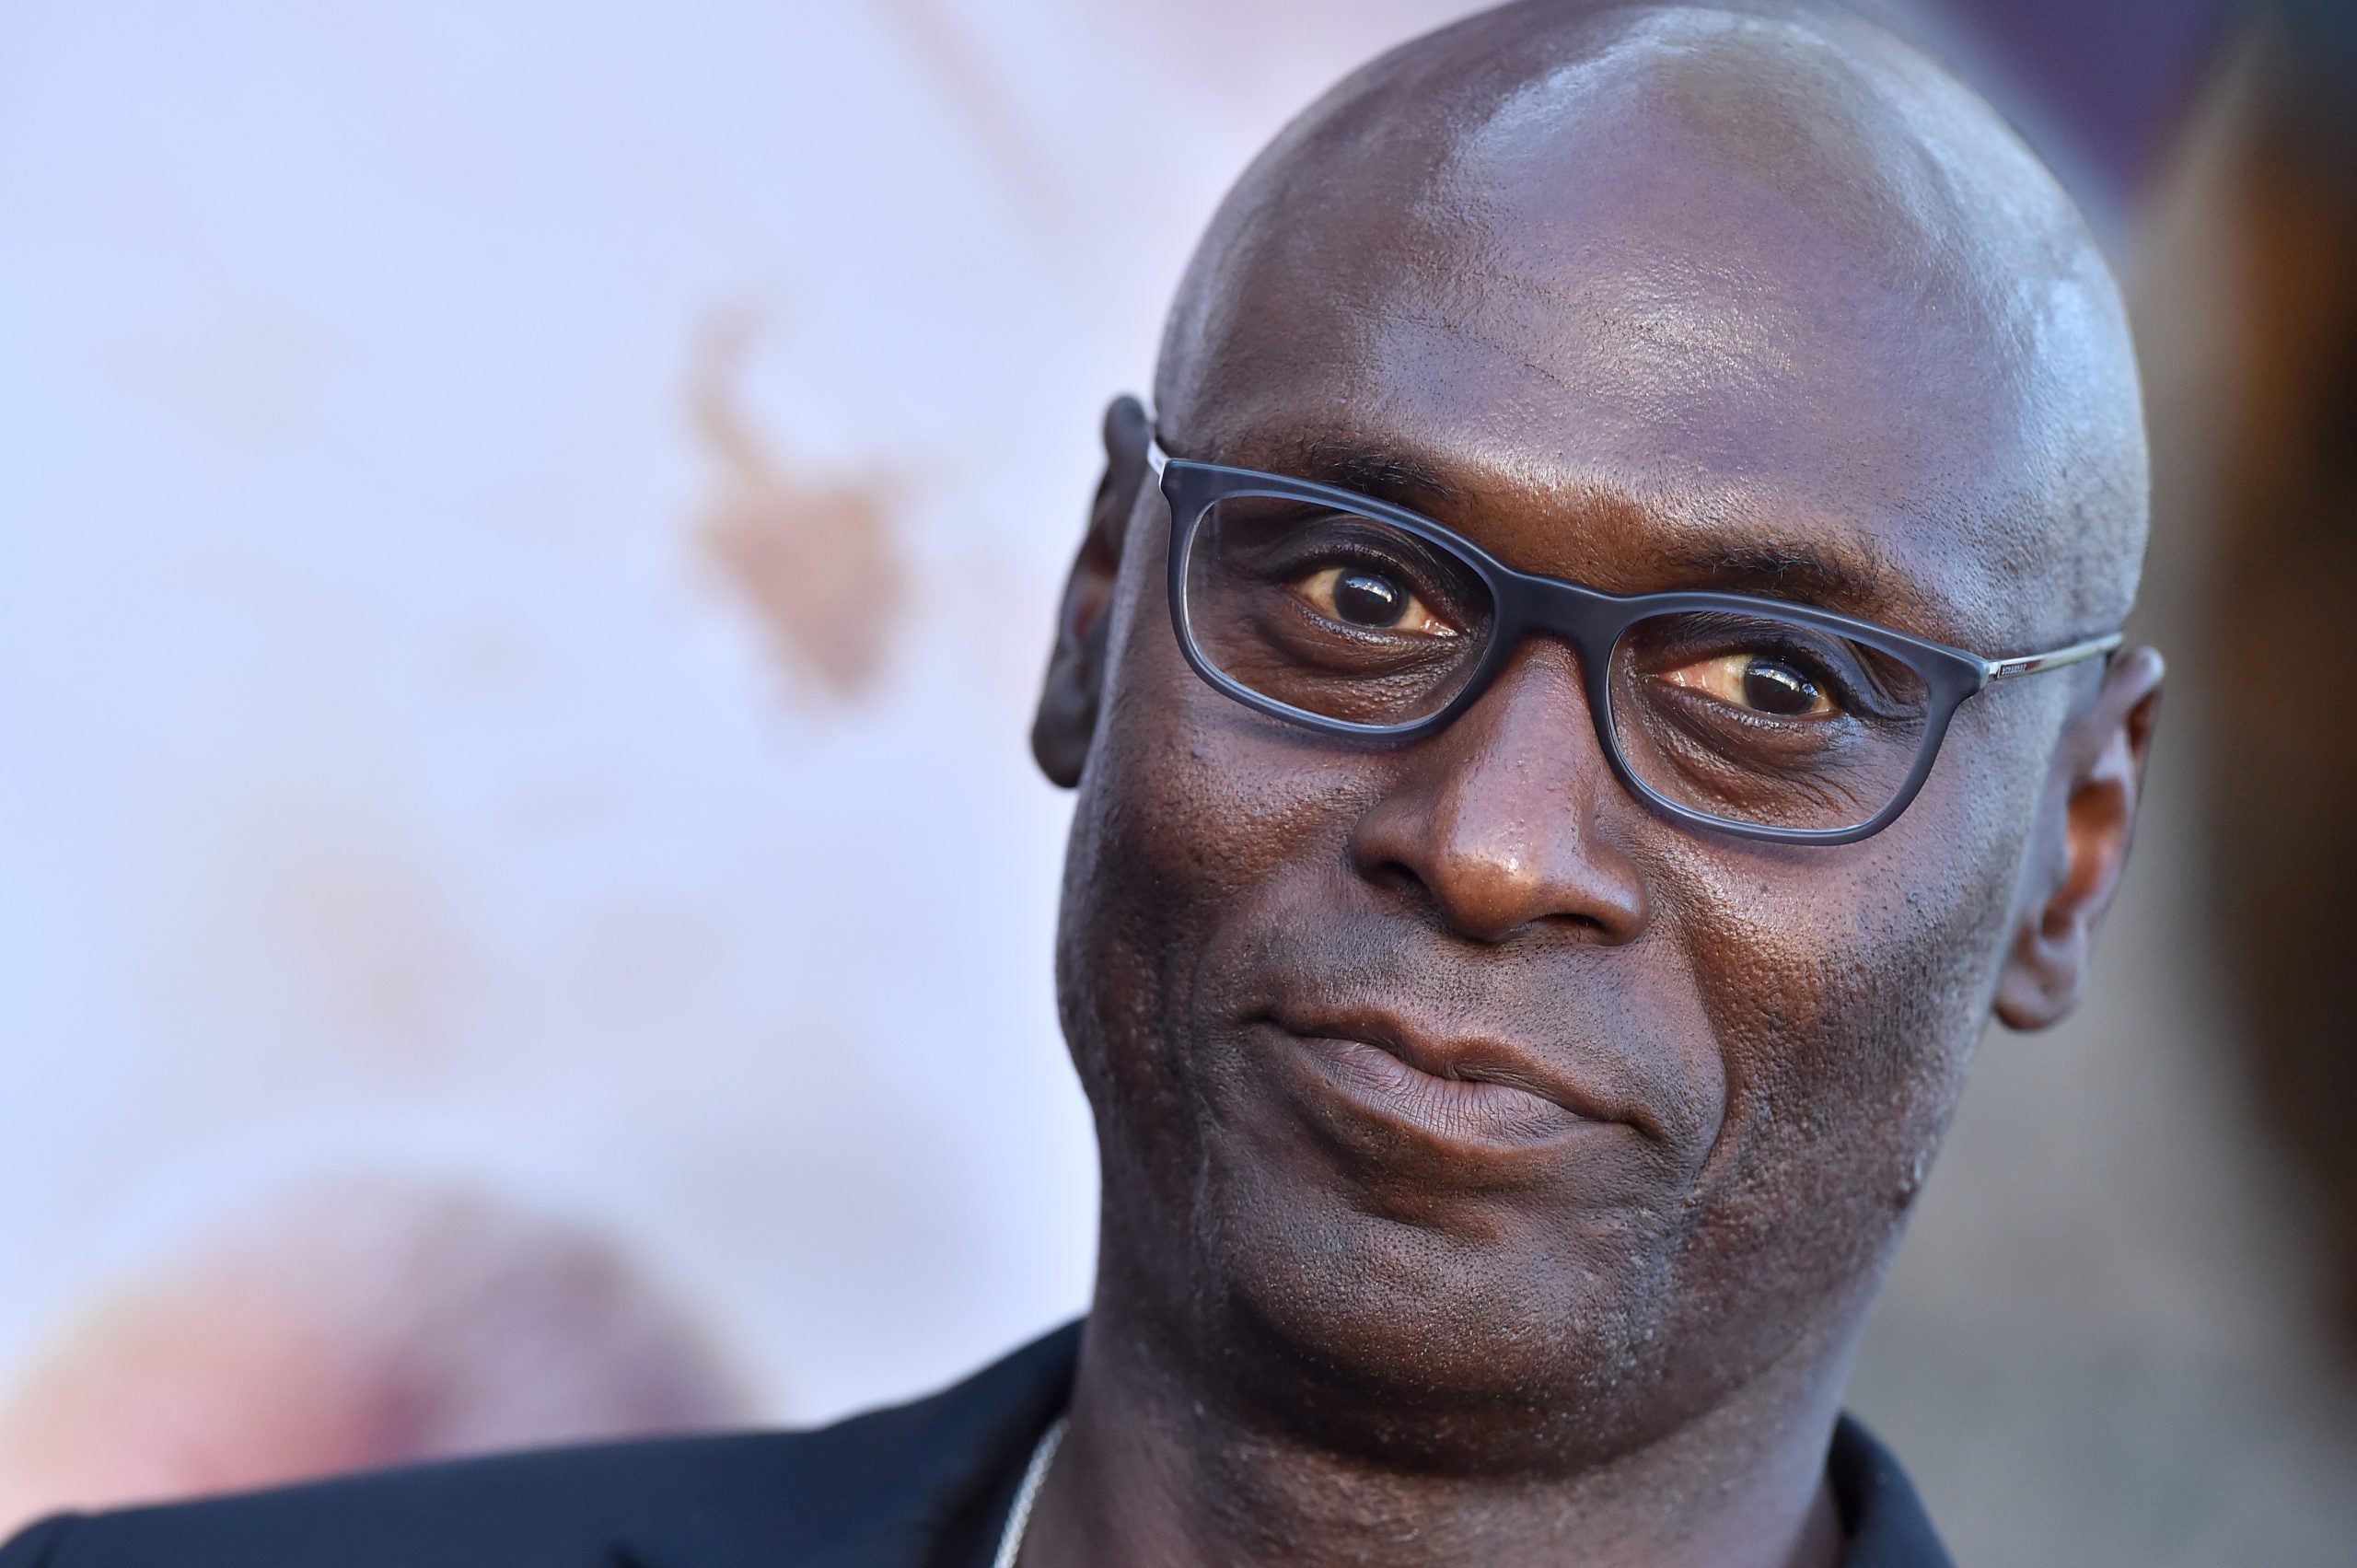 Lance Reddick, Star Of 'The Wire' And 'John Wick' Franchise, Passes Away At 60